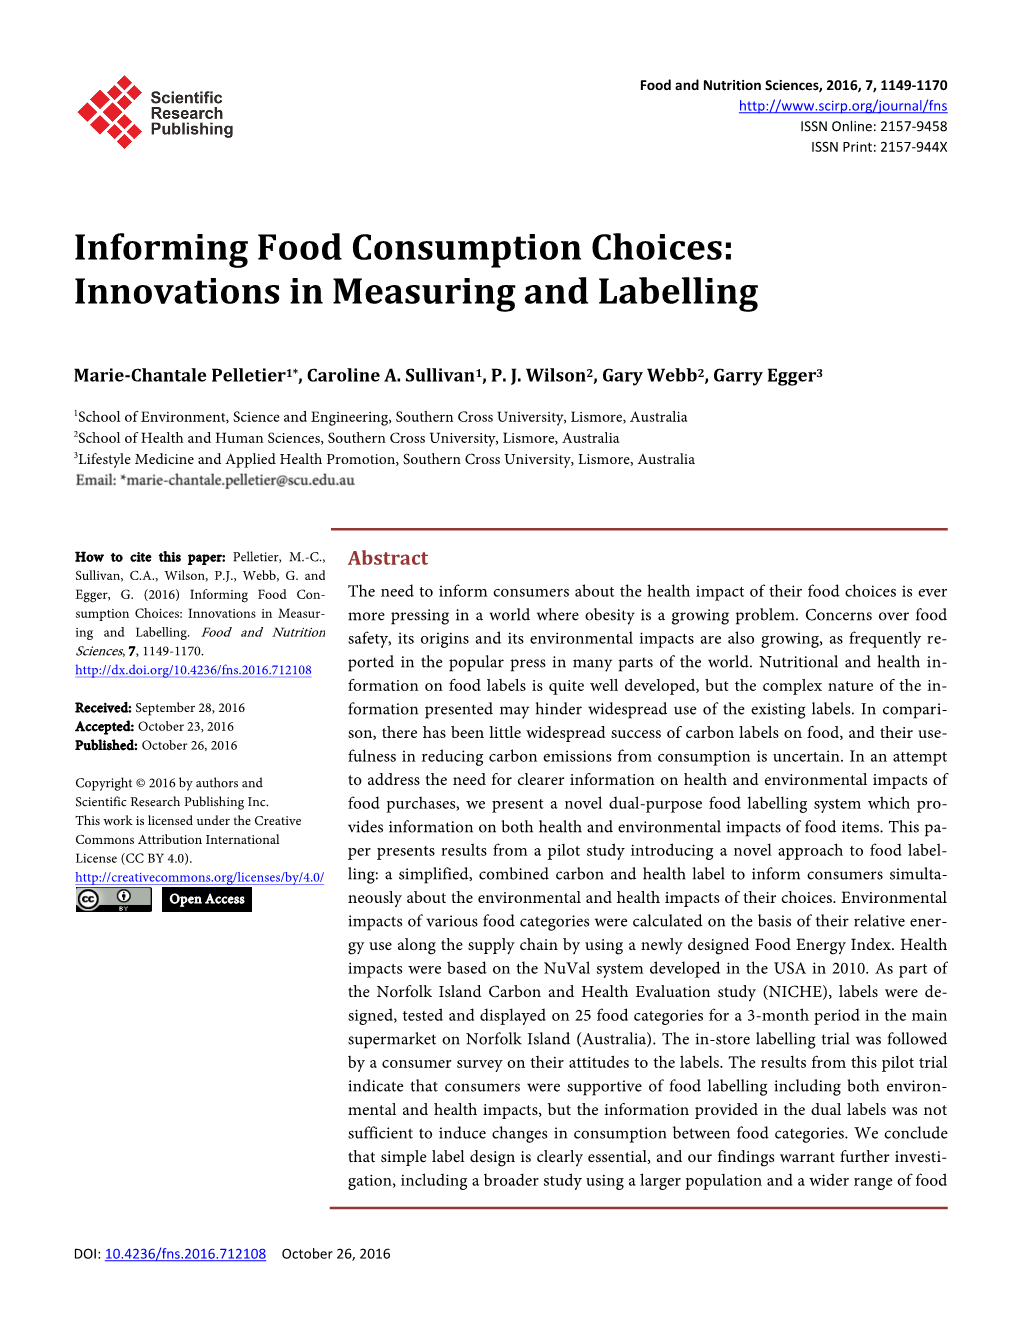 Informing Food Consumption Choices: Innovations in Measuring and Labelling